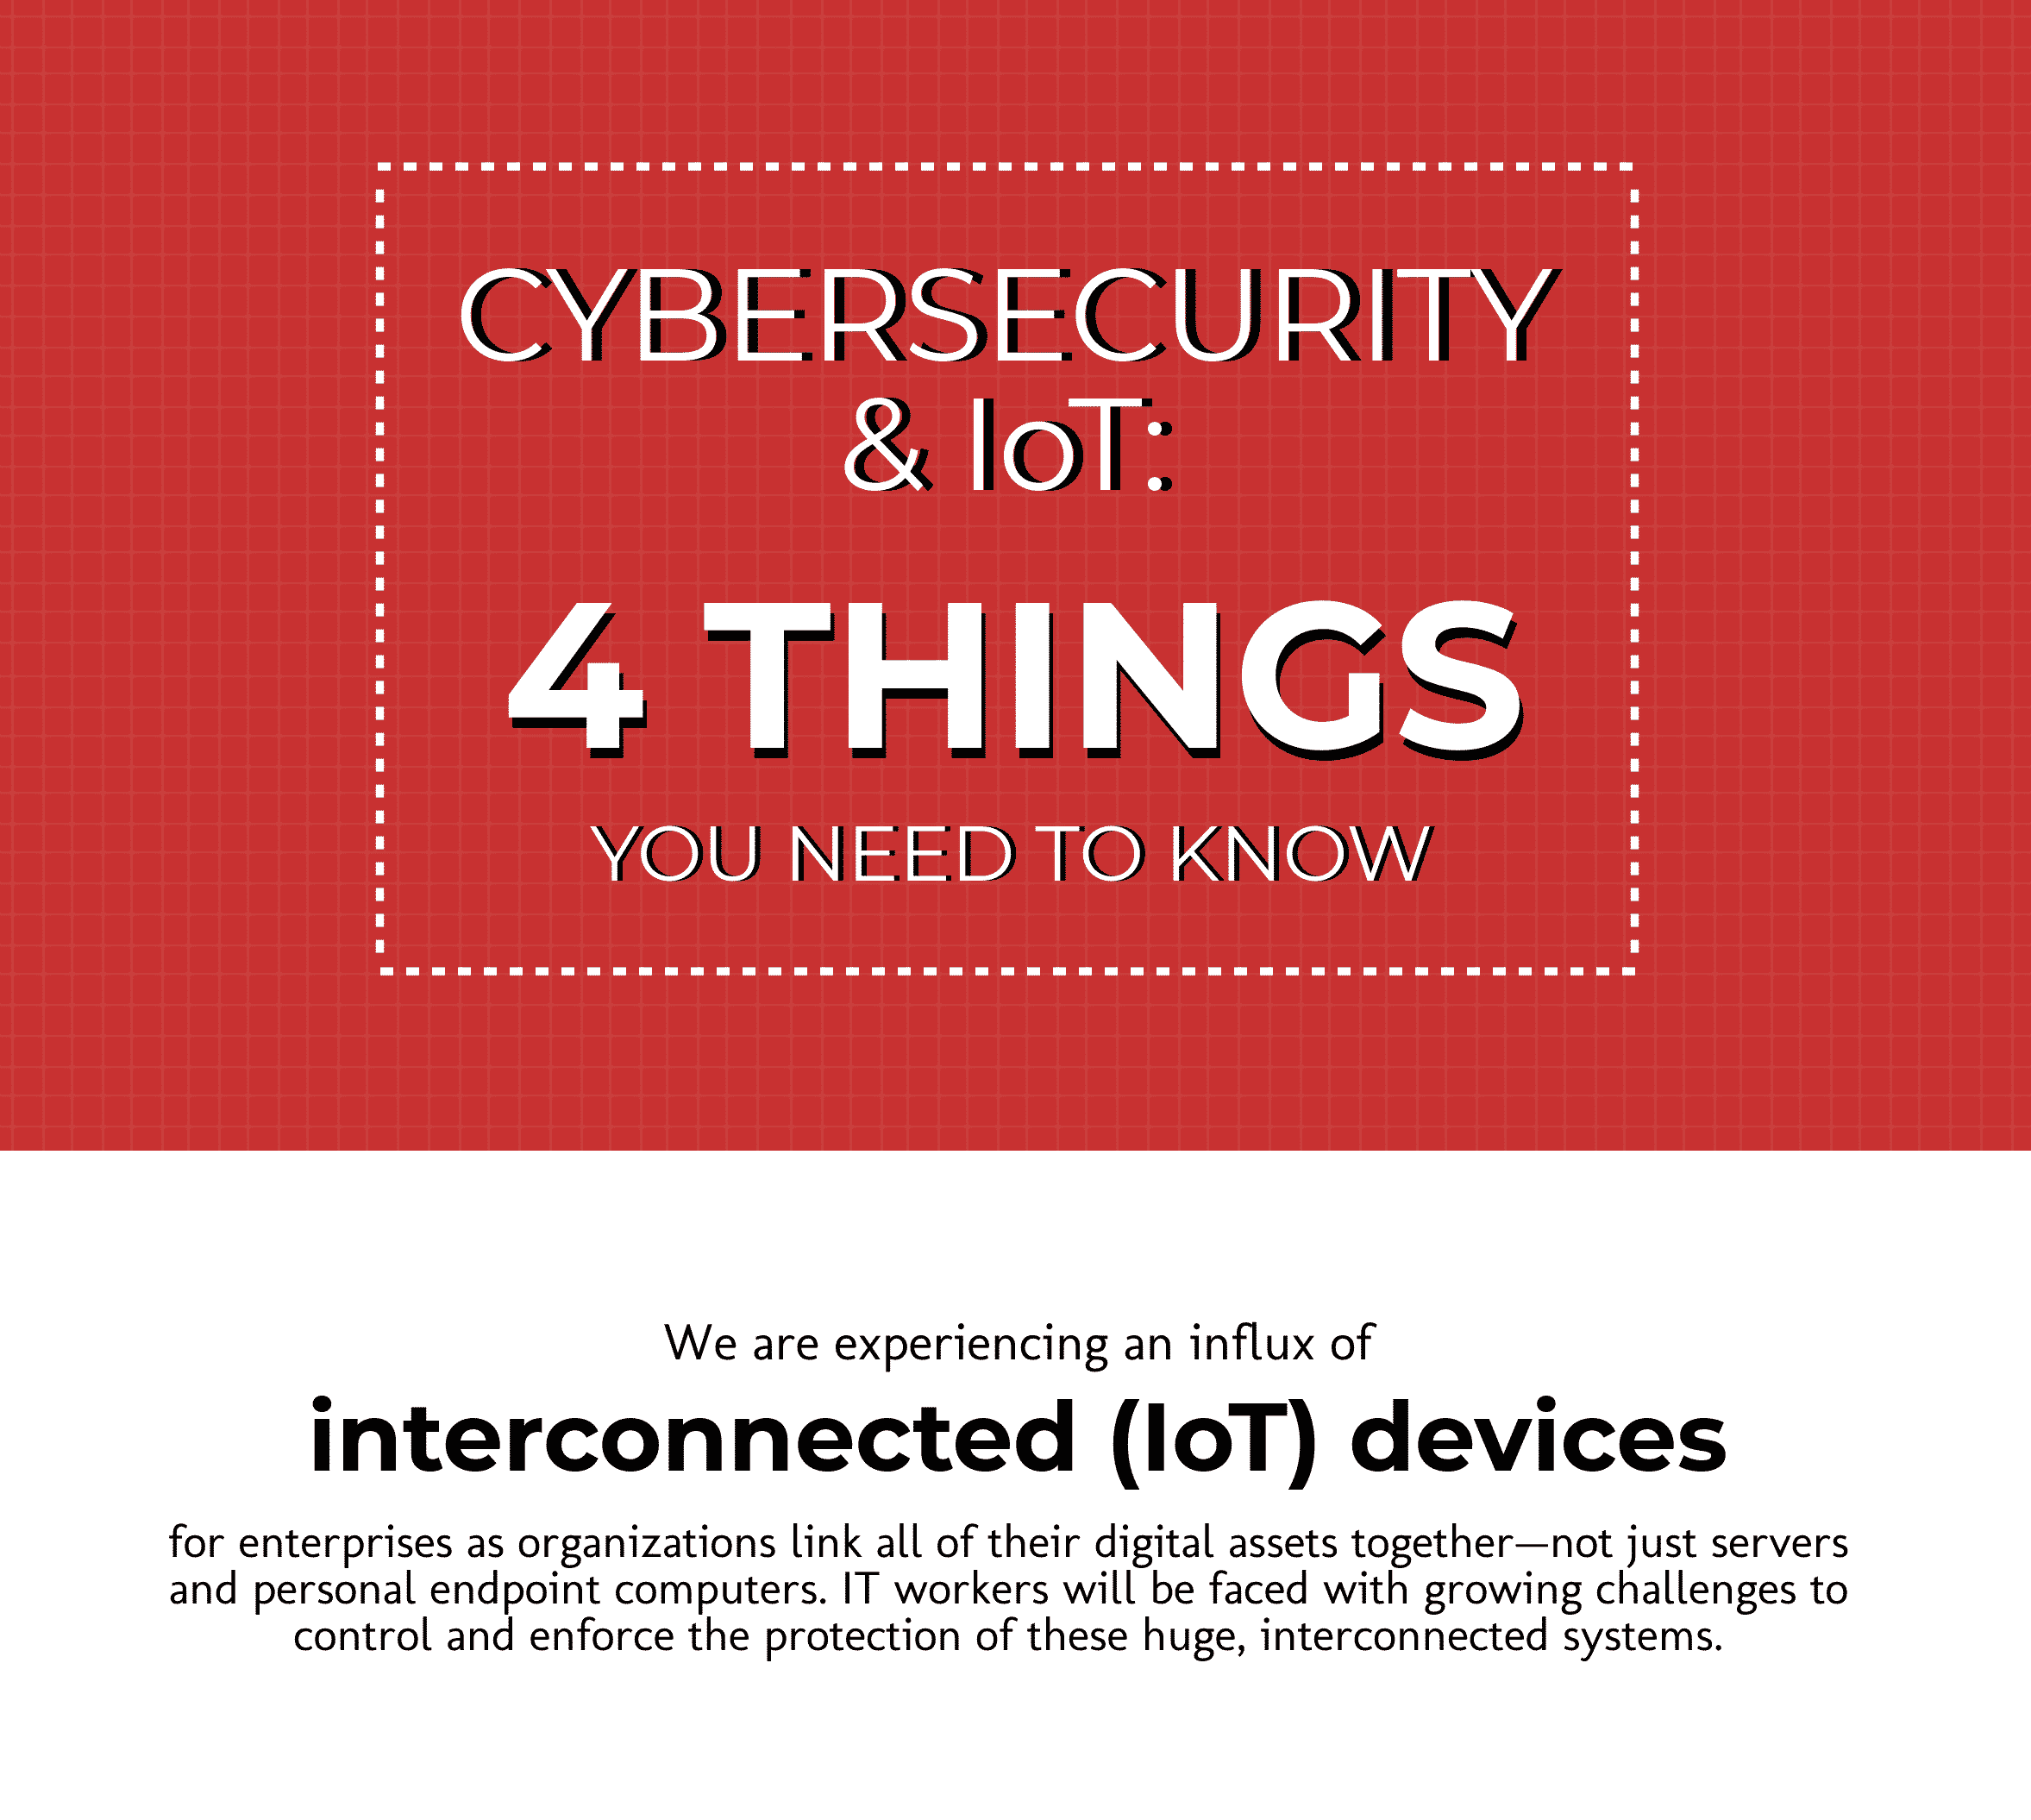 Cybersecurity & IoT: 4 Things You Need to Know